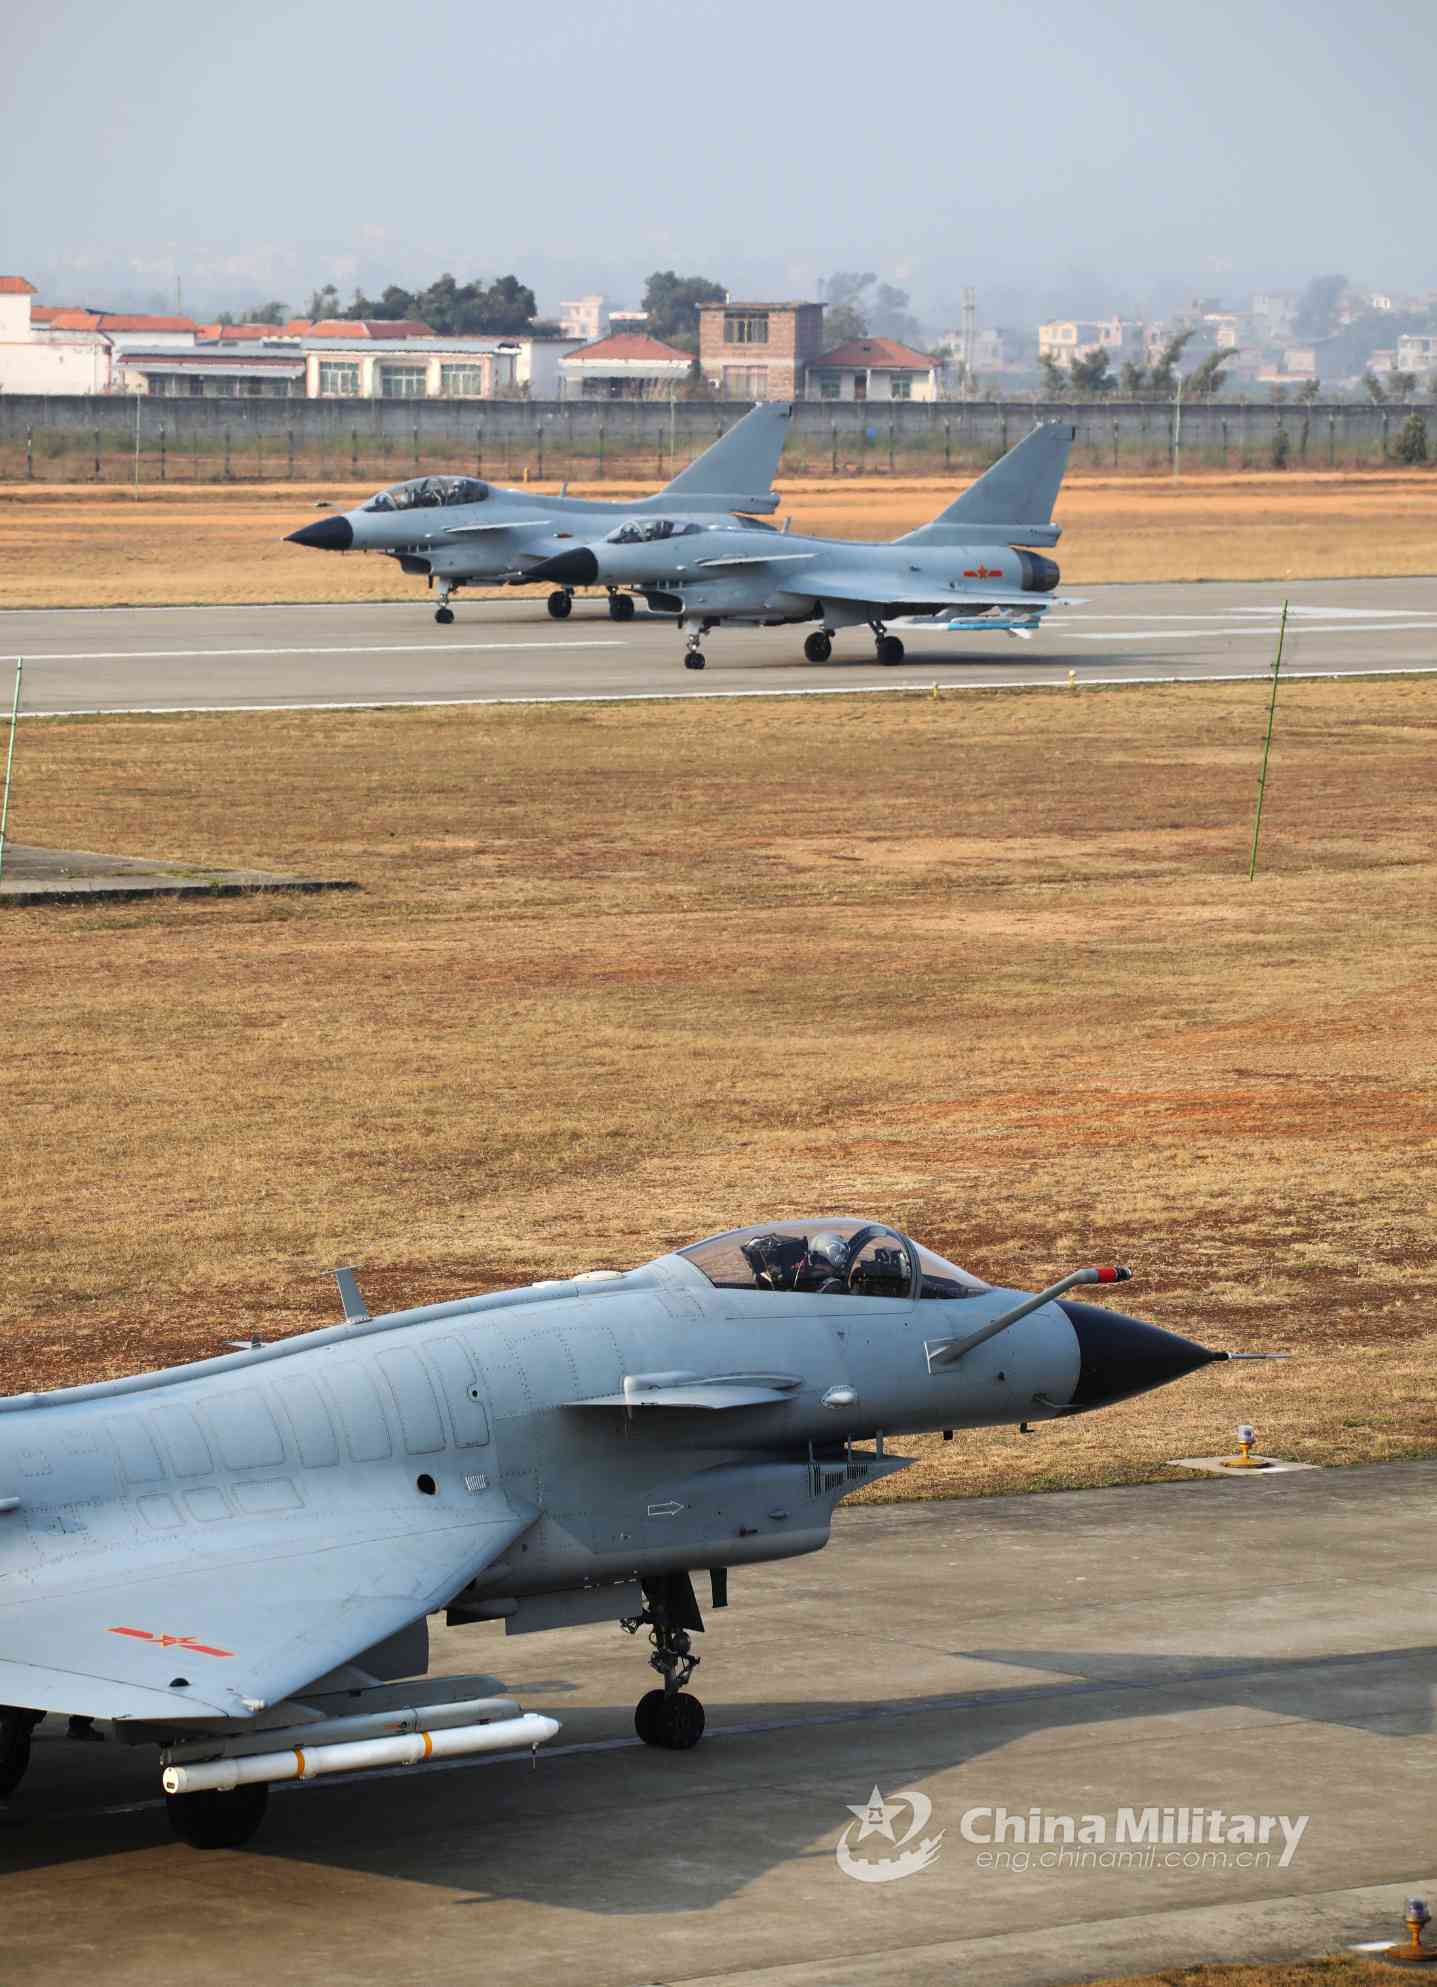 Fighter jets accelerate to take off